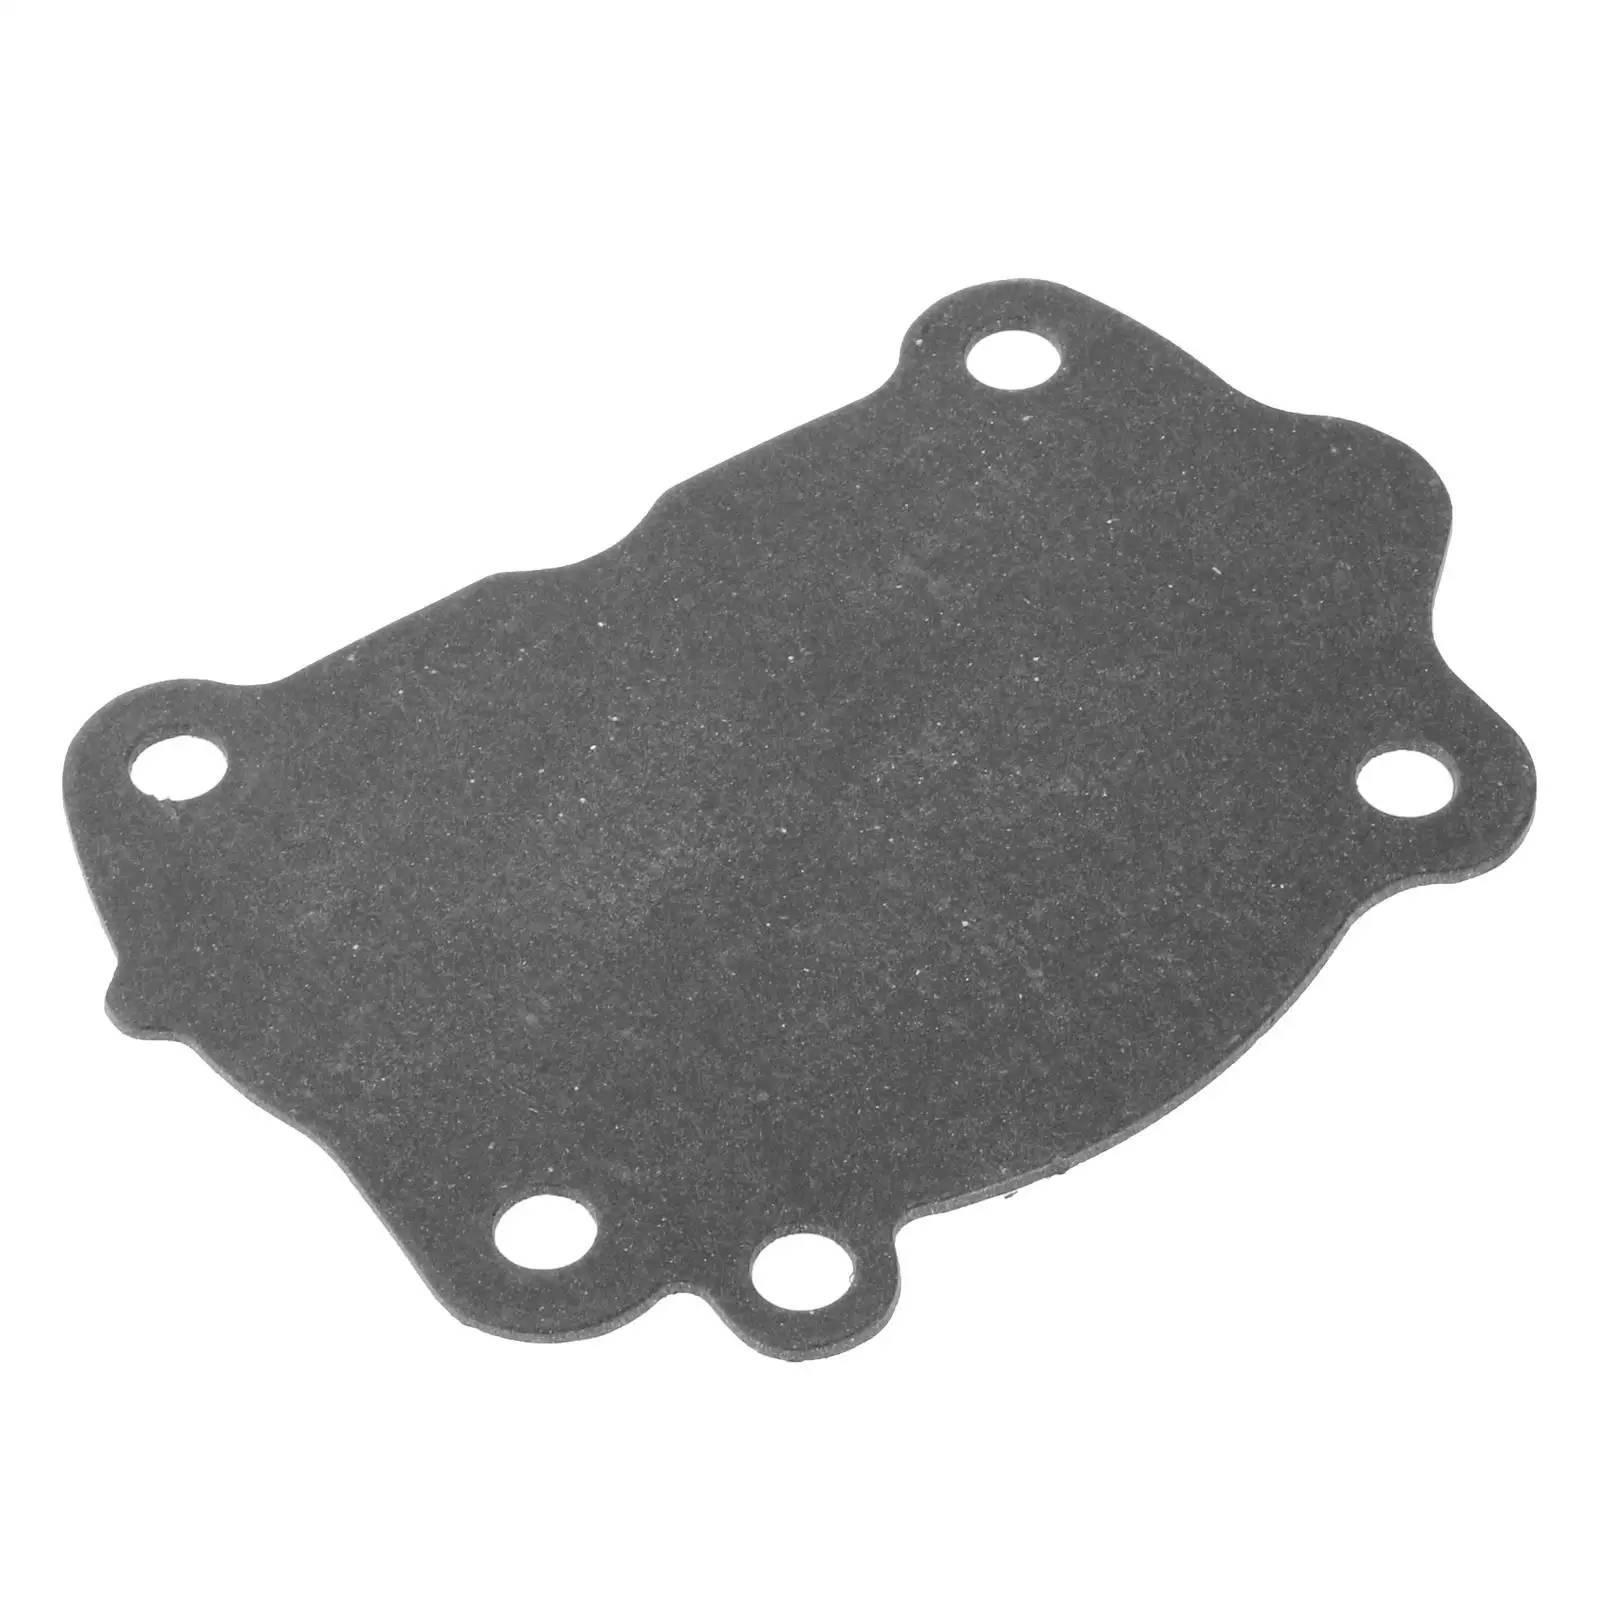 Cylinder Head Gasket High Performance Accessories Outboard Motor Easy to Install Fit for Yamaha 5Mlht 5Mlhu 6E3-11193-A1-00